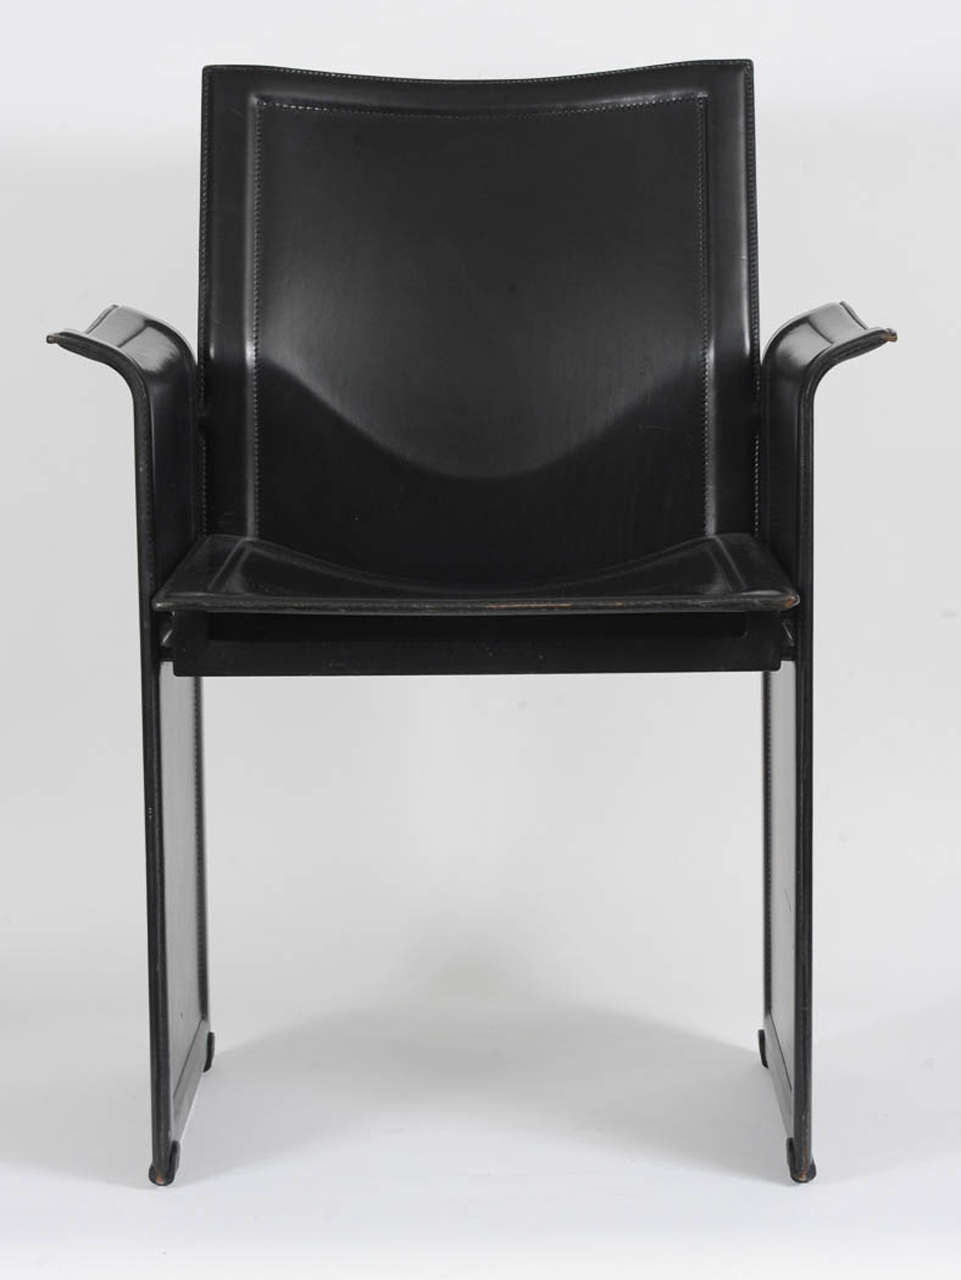 The Korio was designed by Tito Agnoli for Mateo Grassi.
Great quality black leather chair featuring four stitched & molded leather pieces on metal frame panels.